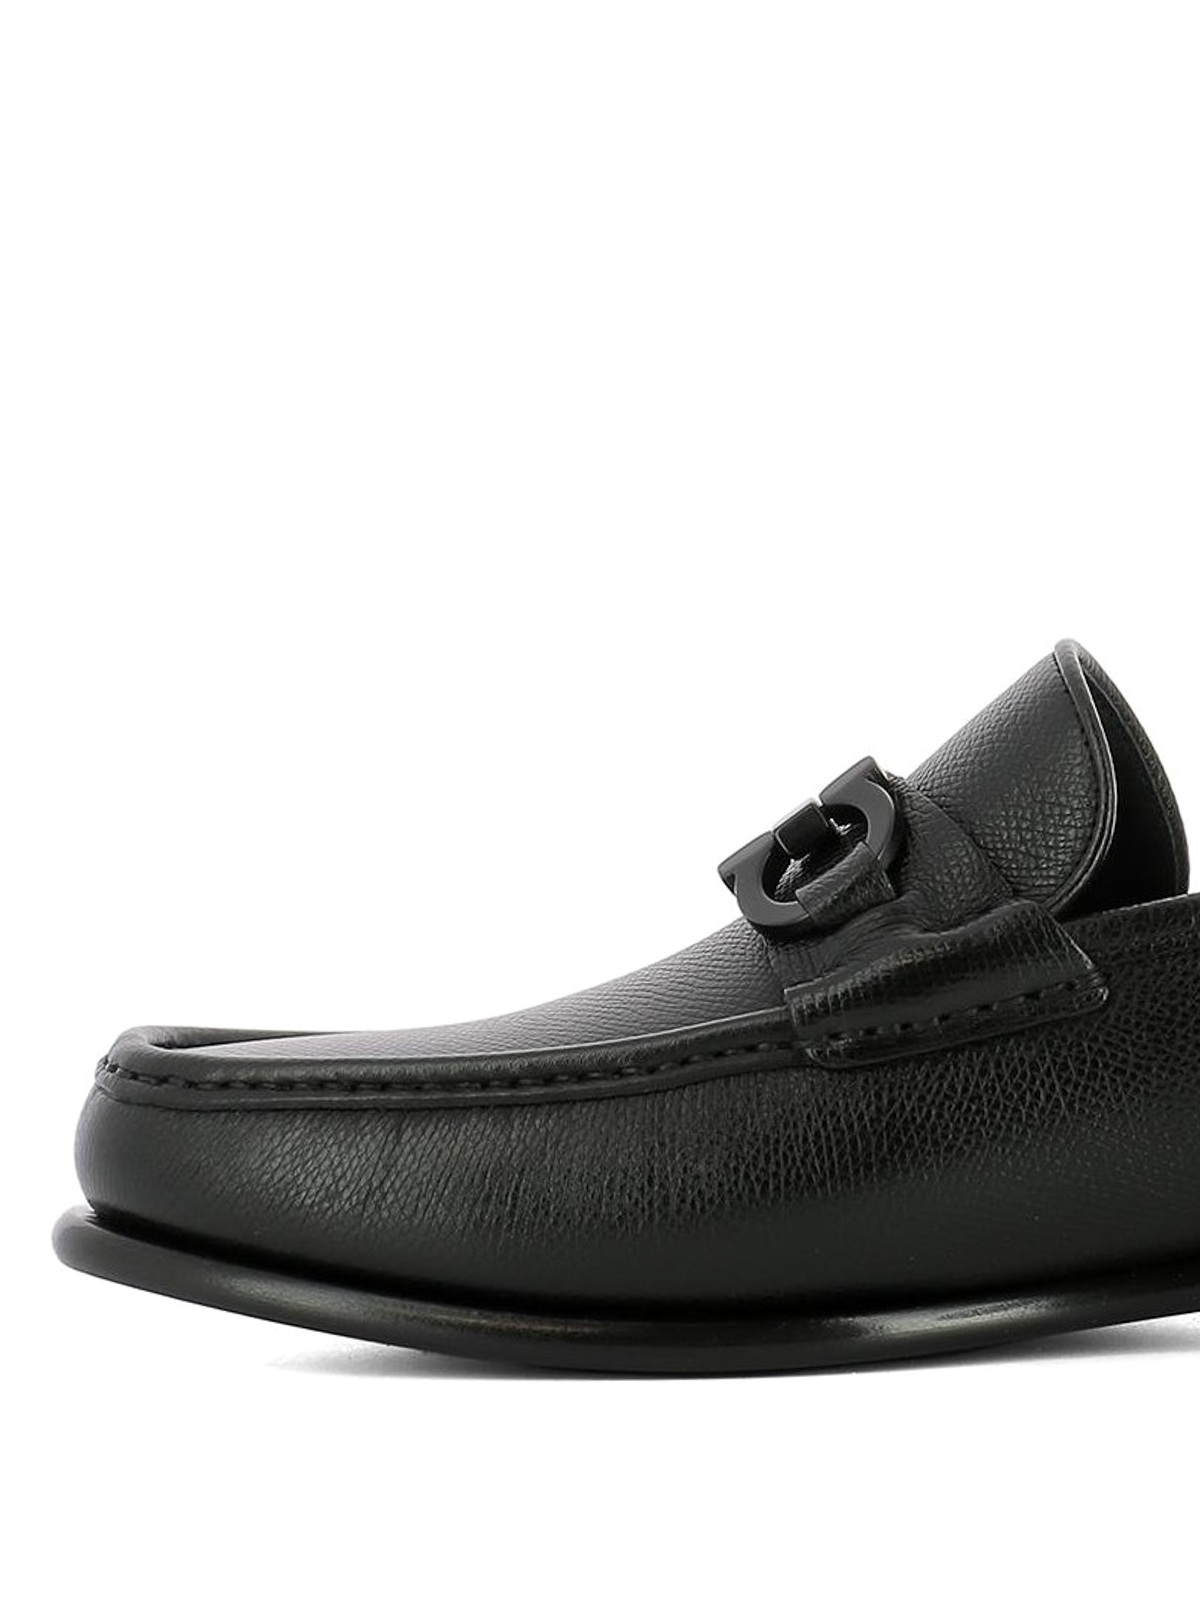 crown loafers